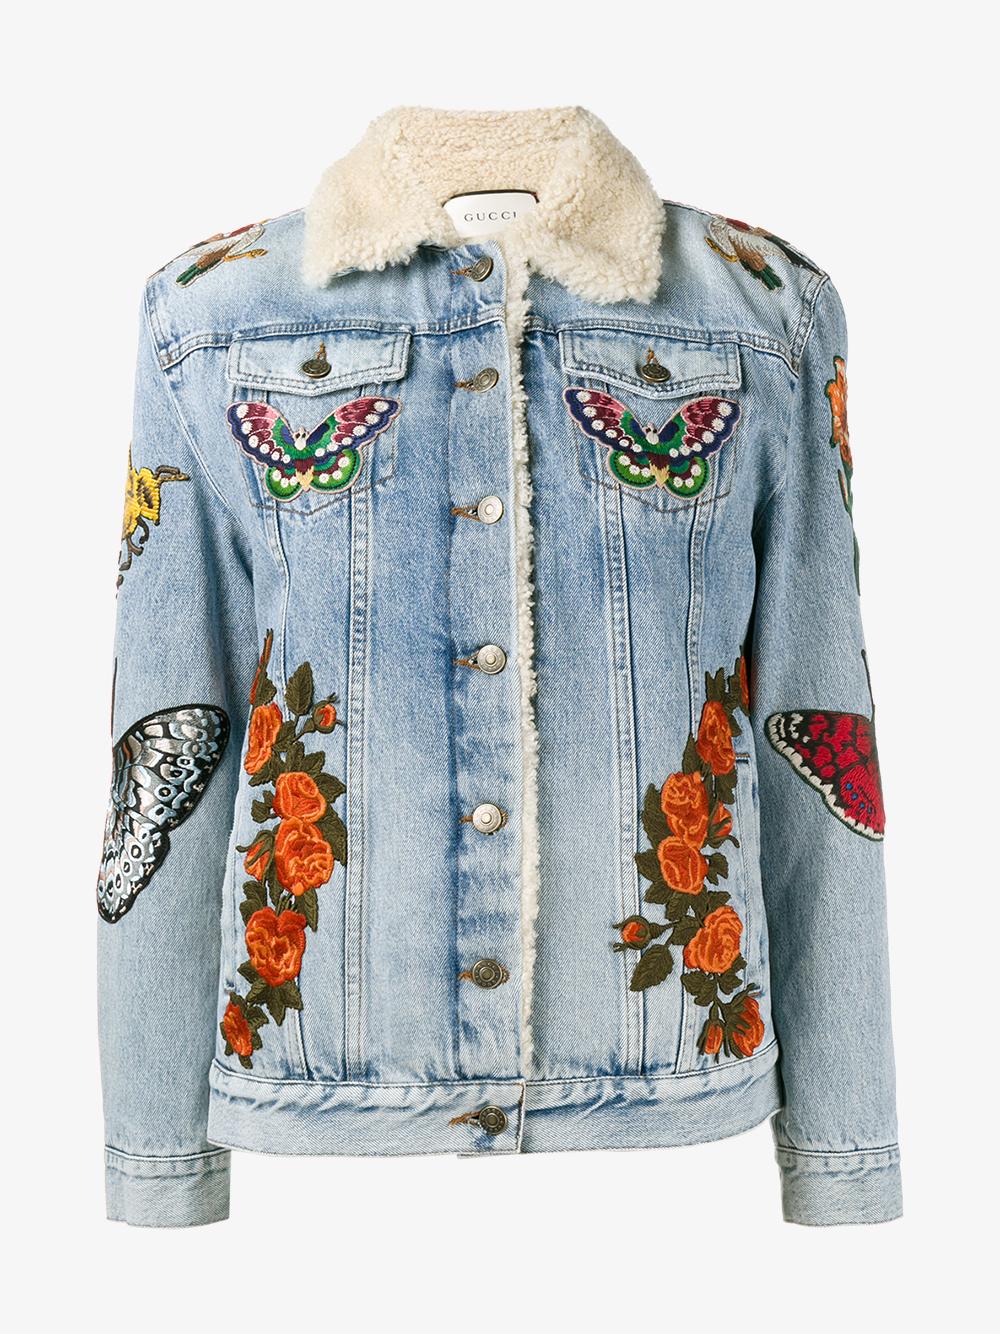 Lyst - Gucci Embroidered Denim Jacket in Blue